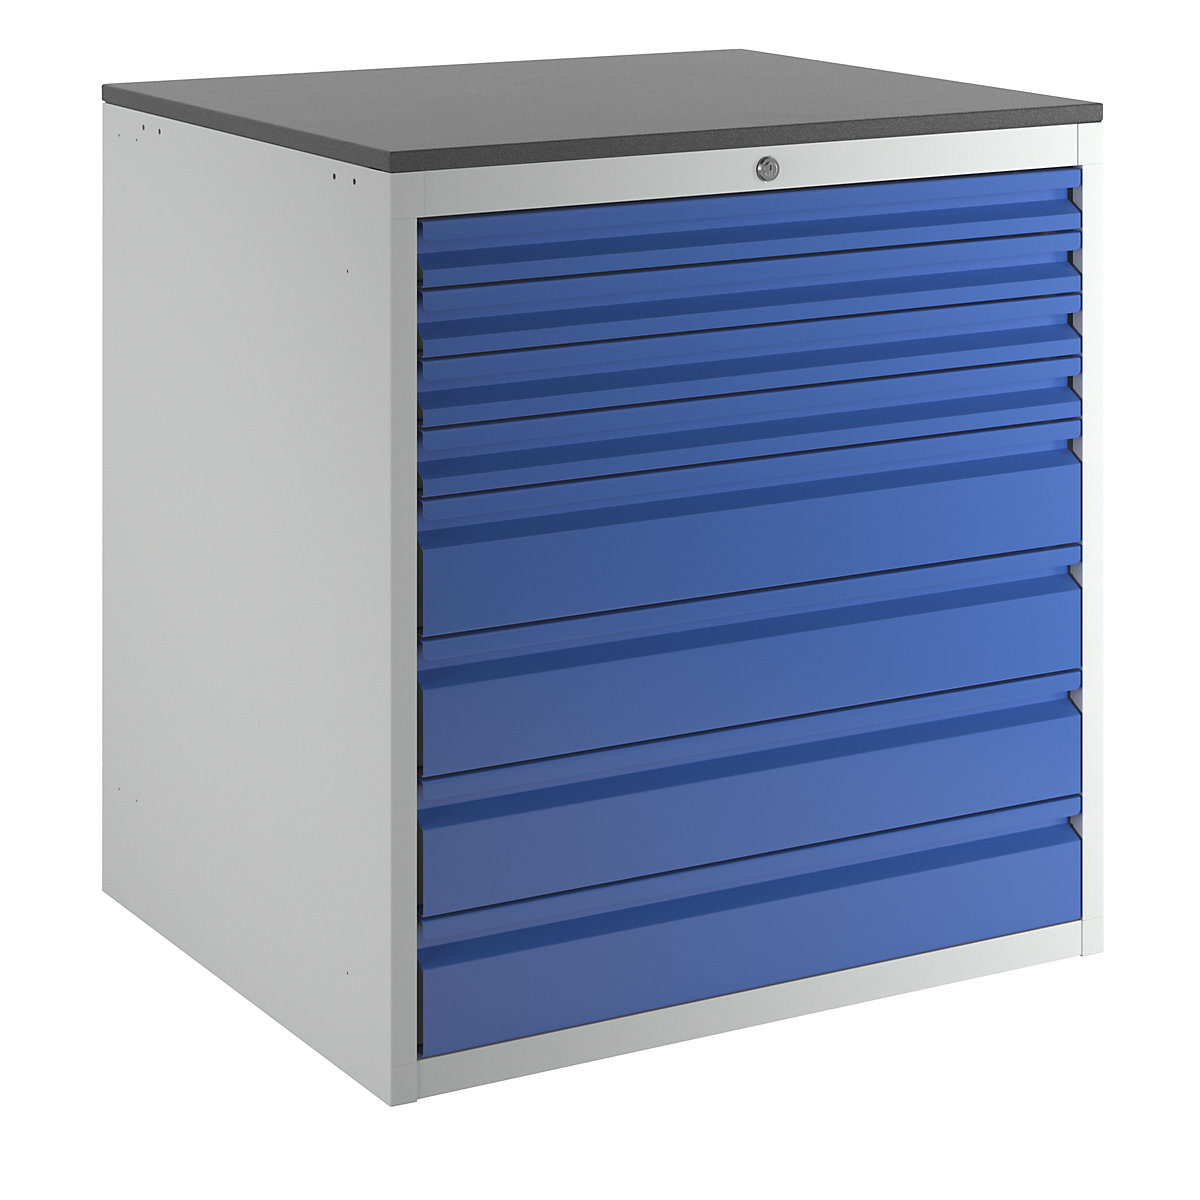 Drawer cupboard with telescopic guides – RAU, height 820 mm, drawers: 4 x 60, 4 x 120 mm, light grey / gentian blue, width 770 mm-7